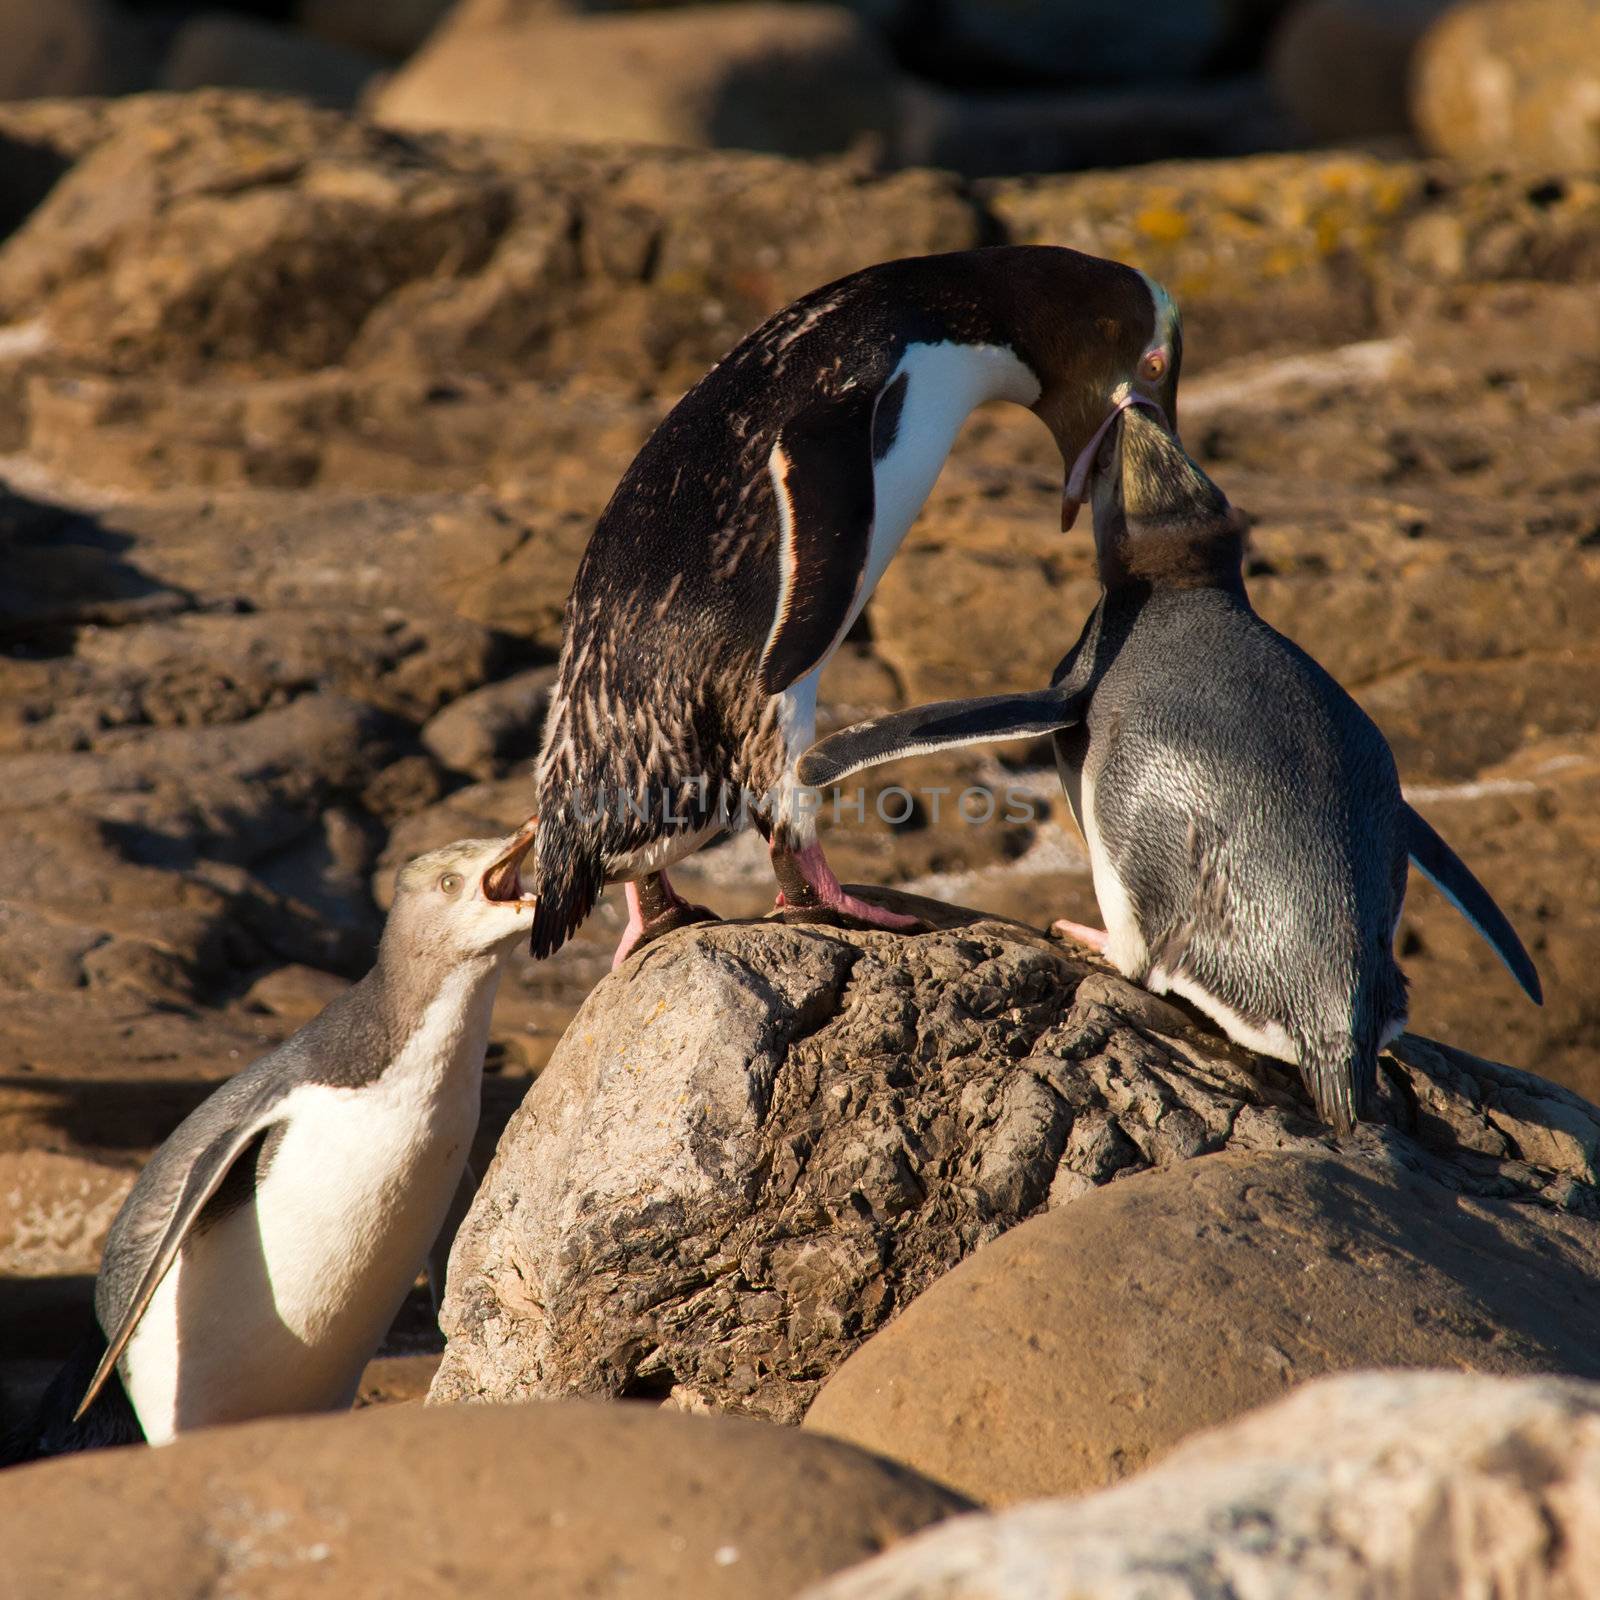 NZ Yellow-eyed Penguins or Hoiho feeding the young by PiLens